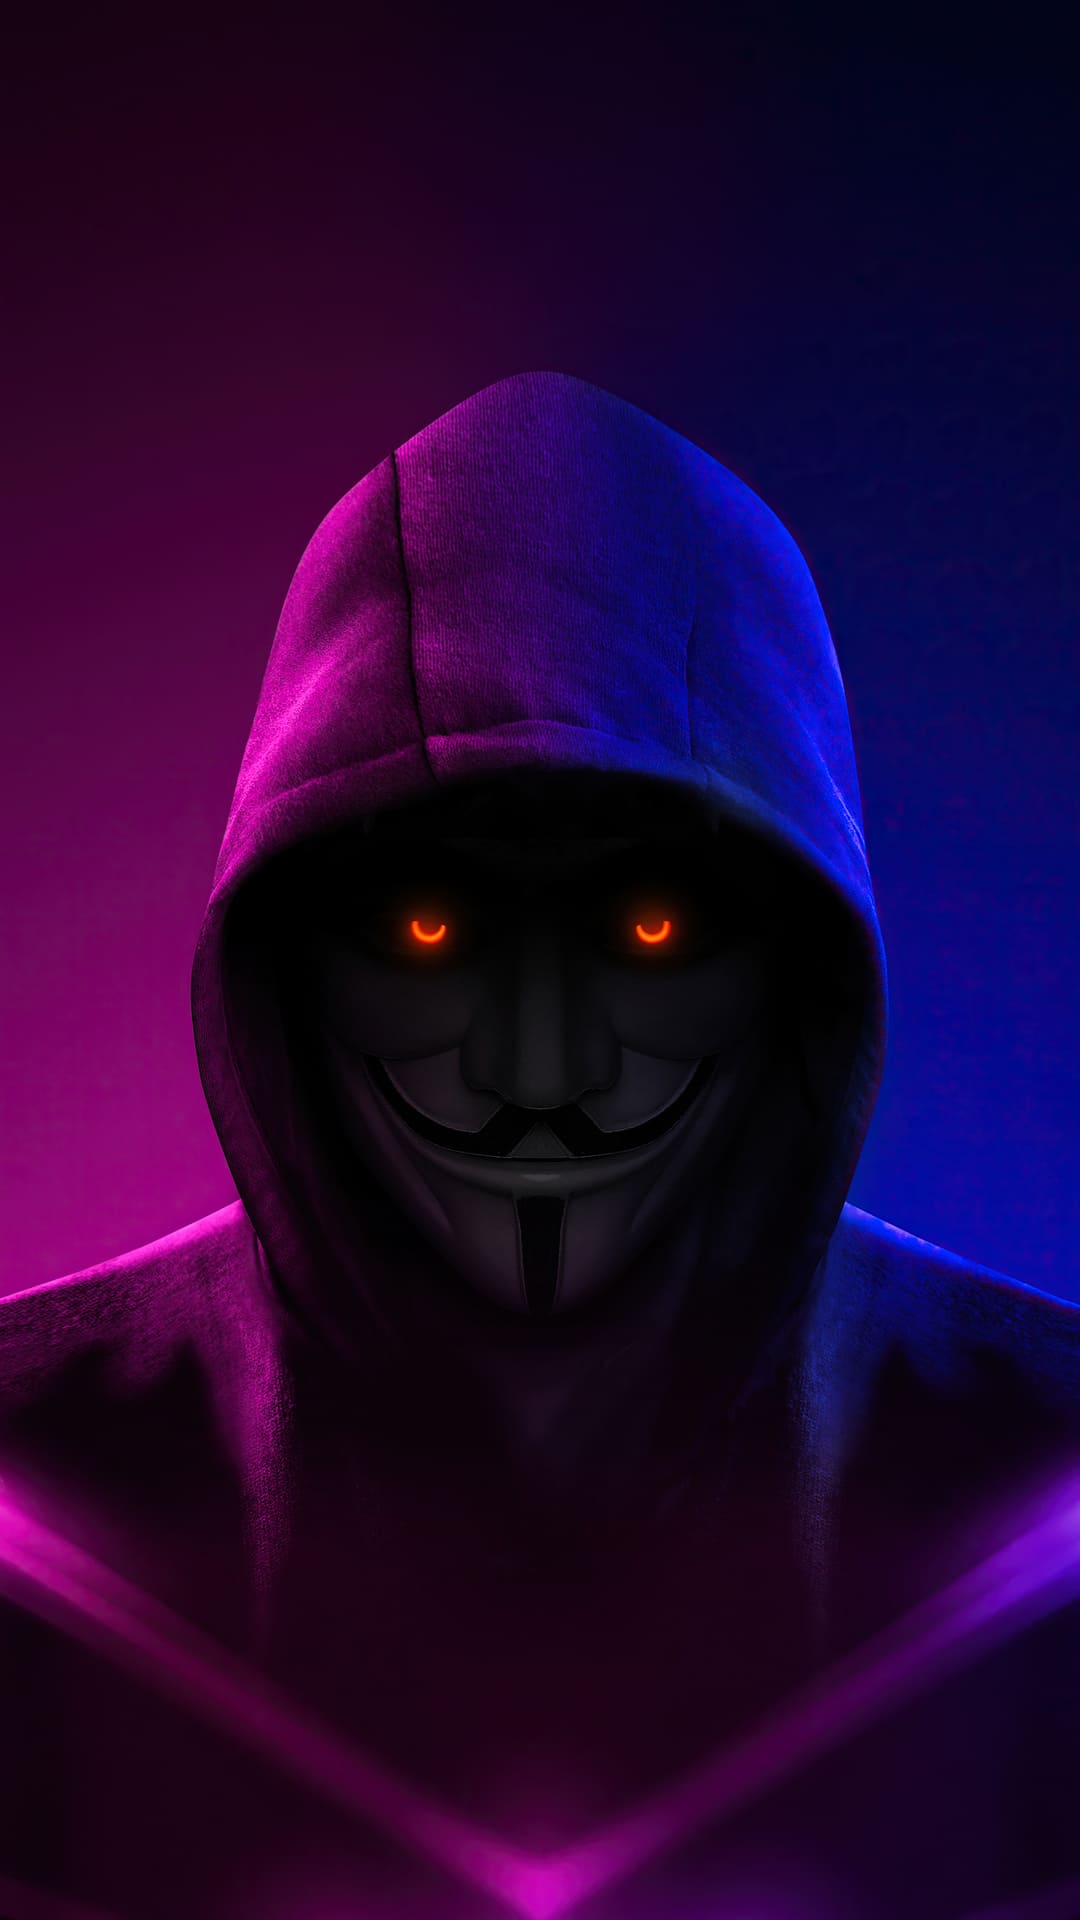 Tải xuống APK HD Anonymous Hacker Wallpapers cho Android